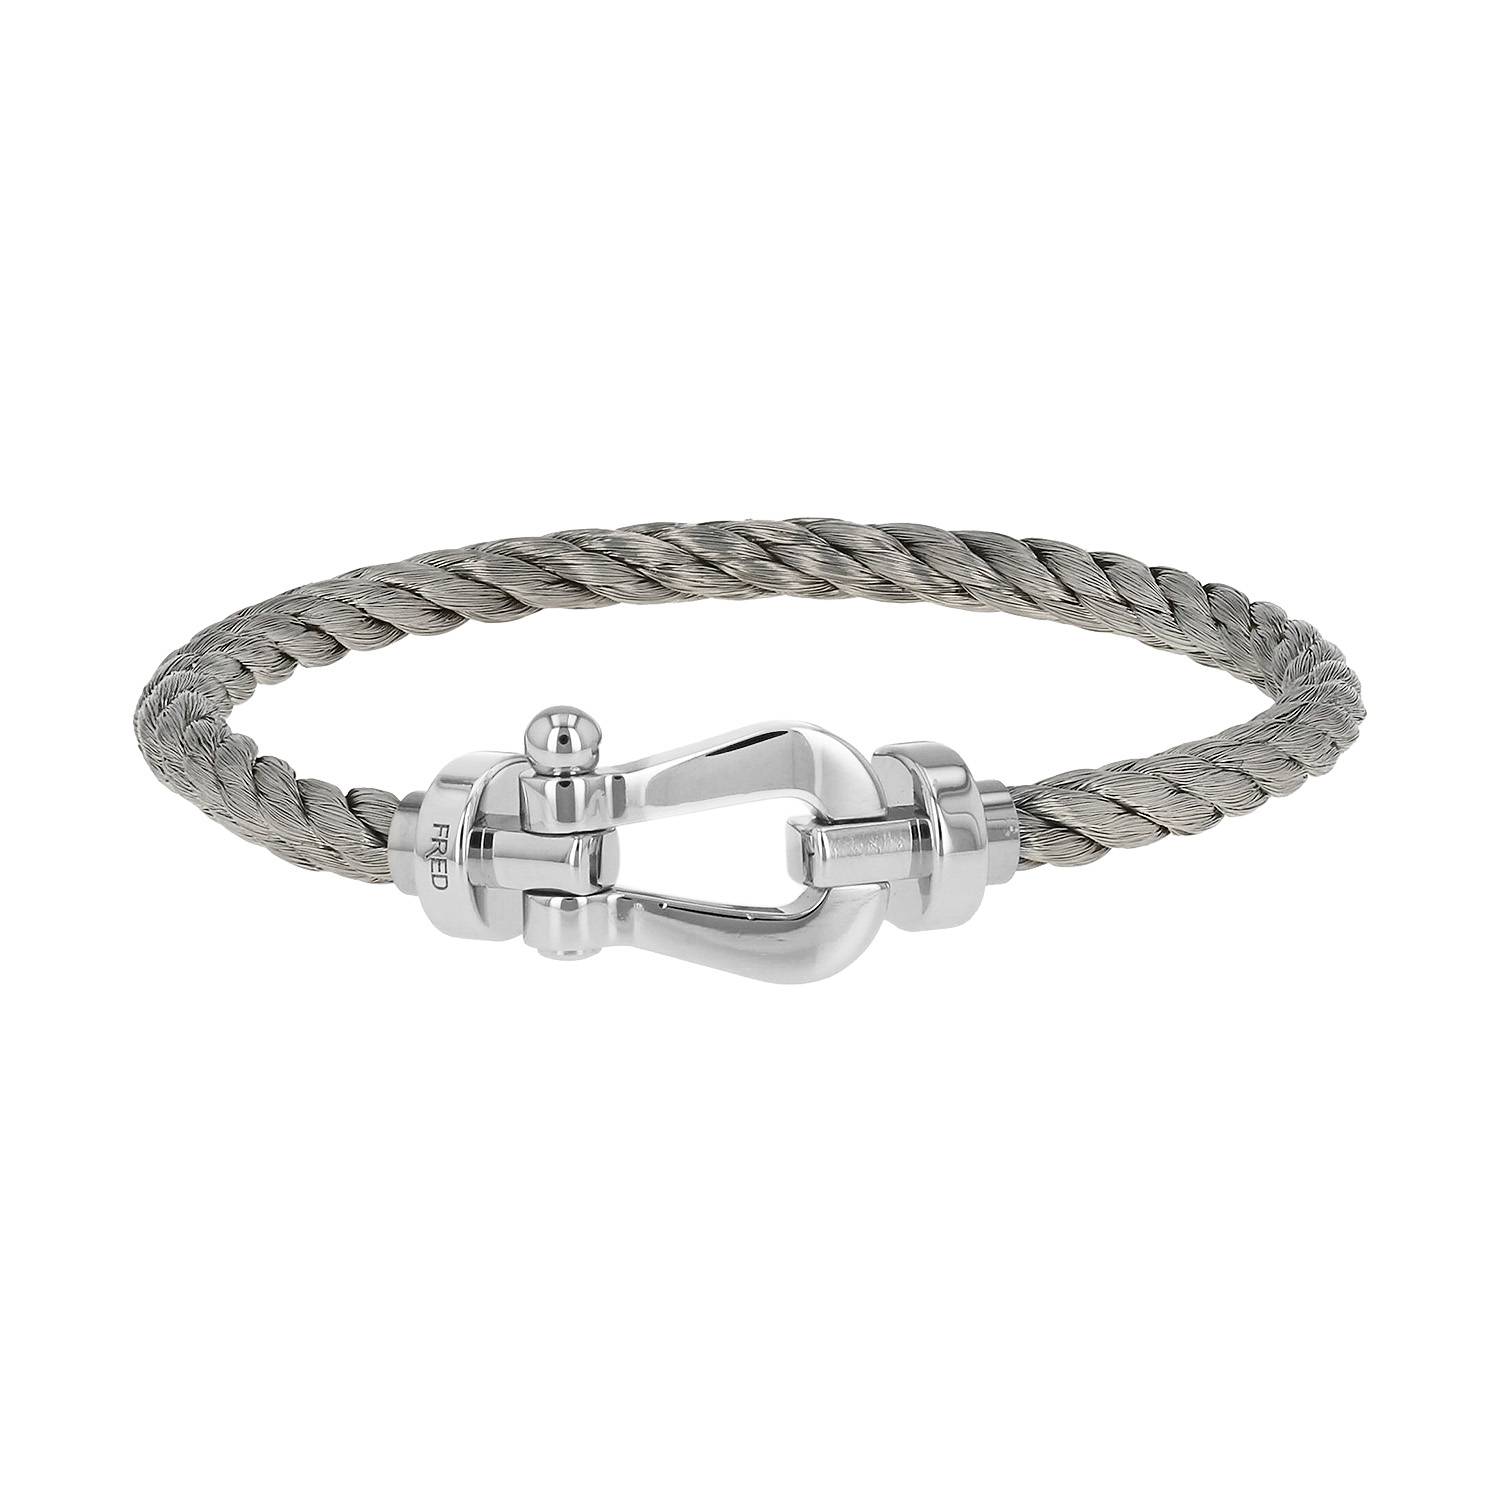 Force 10 Large Model Bracelet In And Stainless Steel